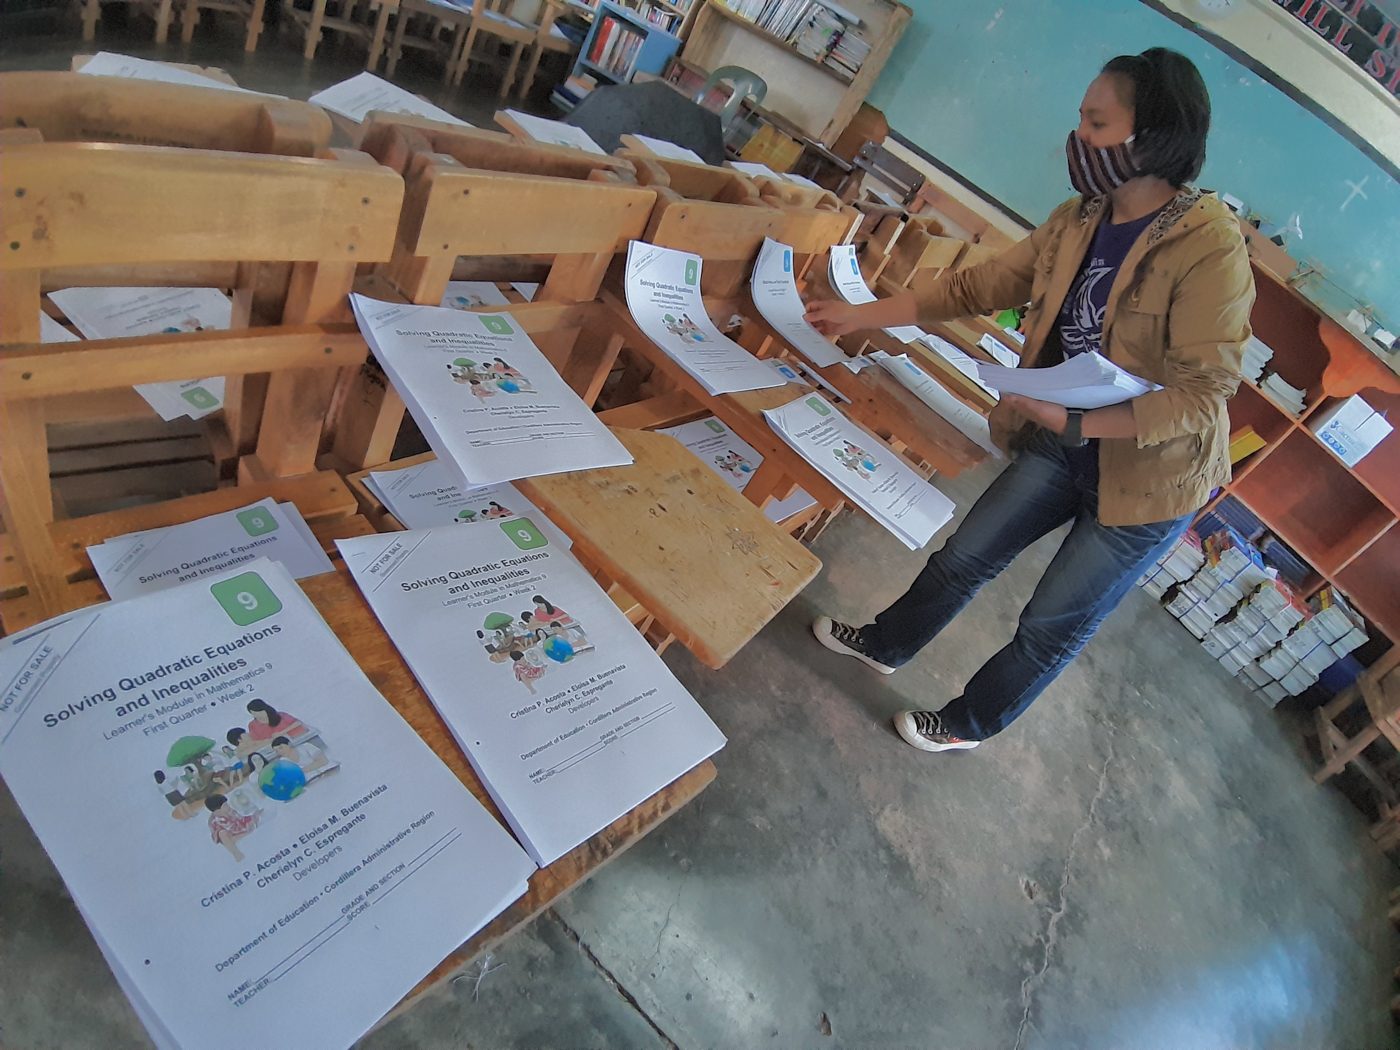 Sharing of modules safe with proper disinfection – DepEd official